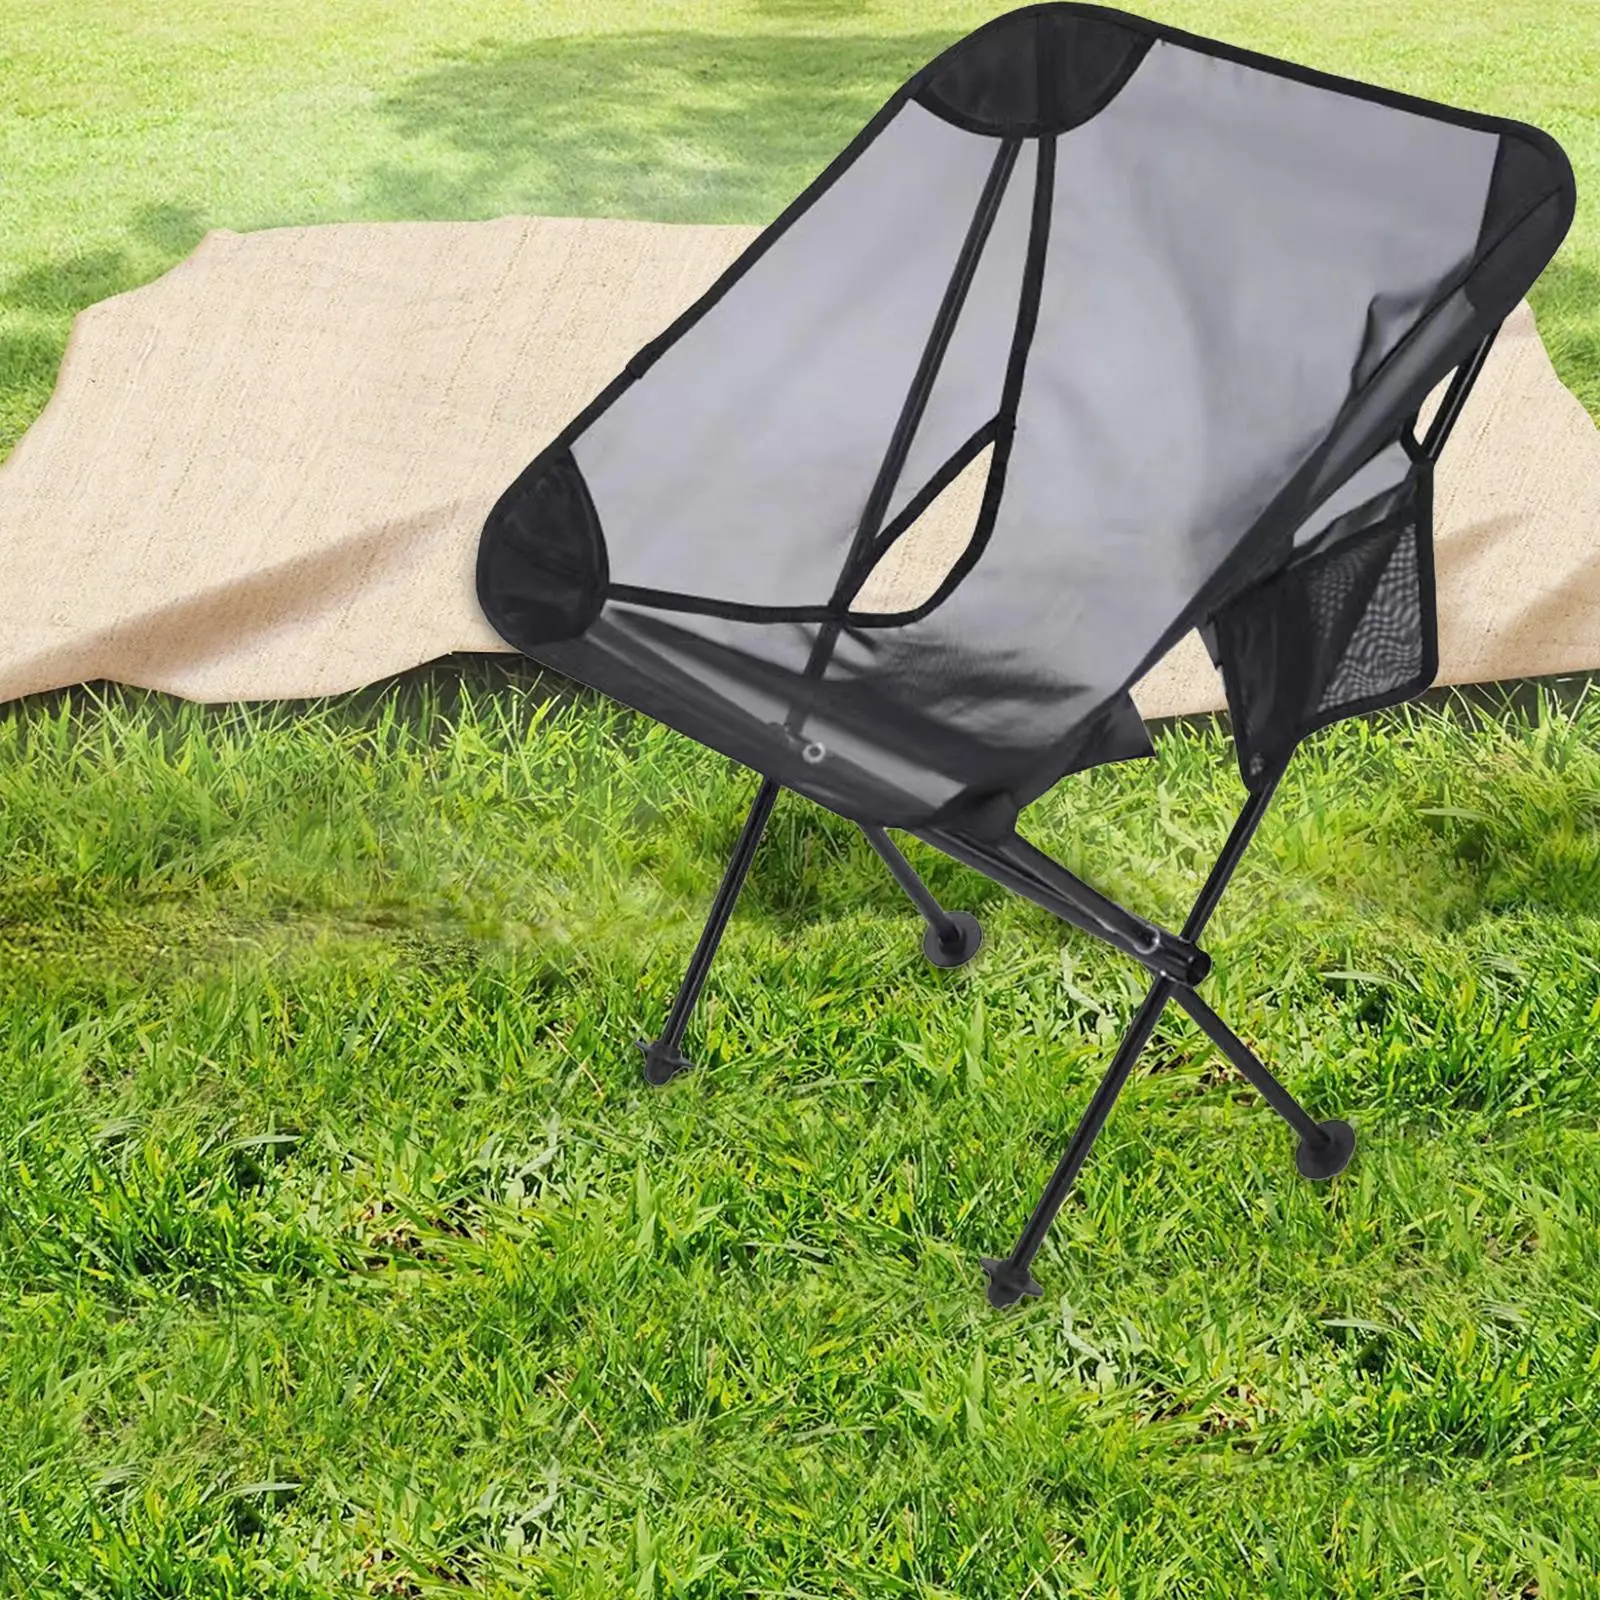 Folding Camping Chair Outdoor Moon Chair for Outdoor Collapsible with Carrying Bag Picnics Gardens Folding Chair Beach Chair